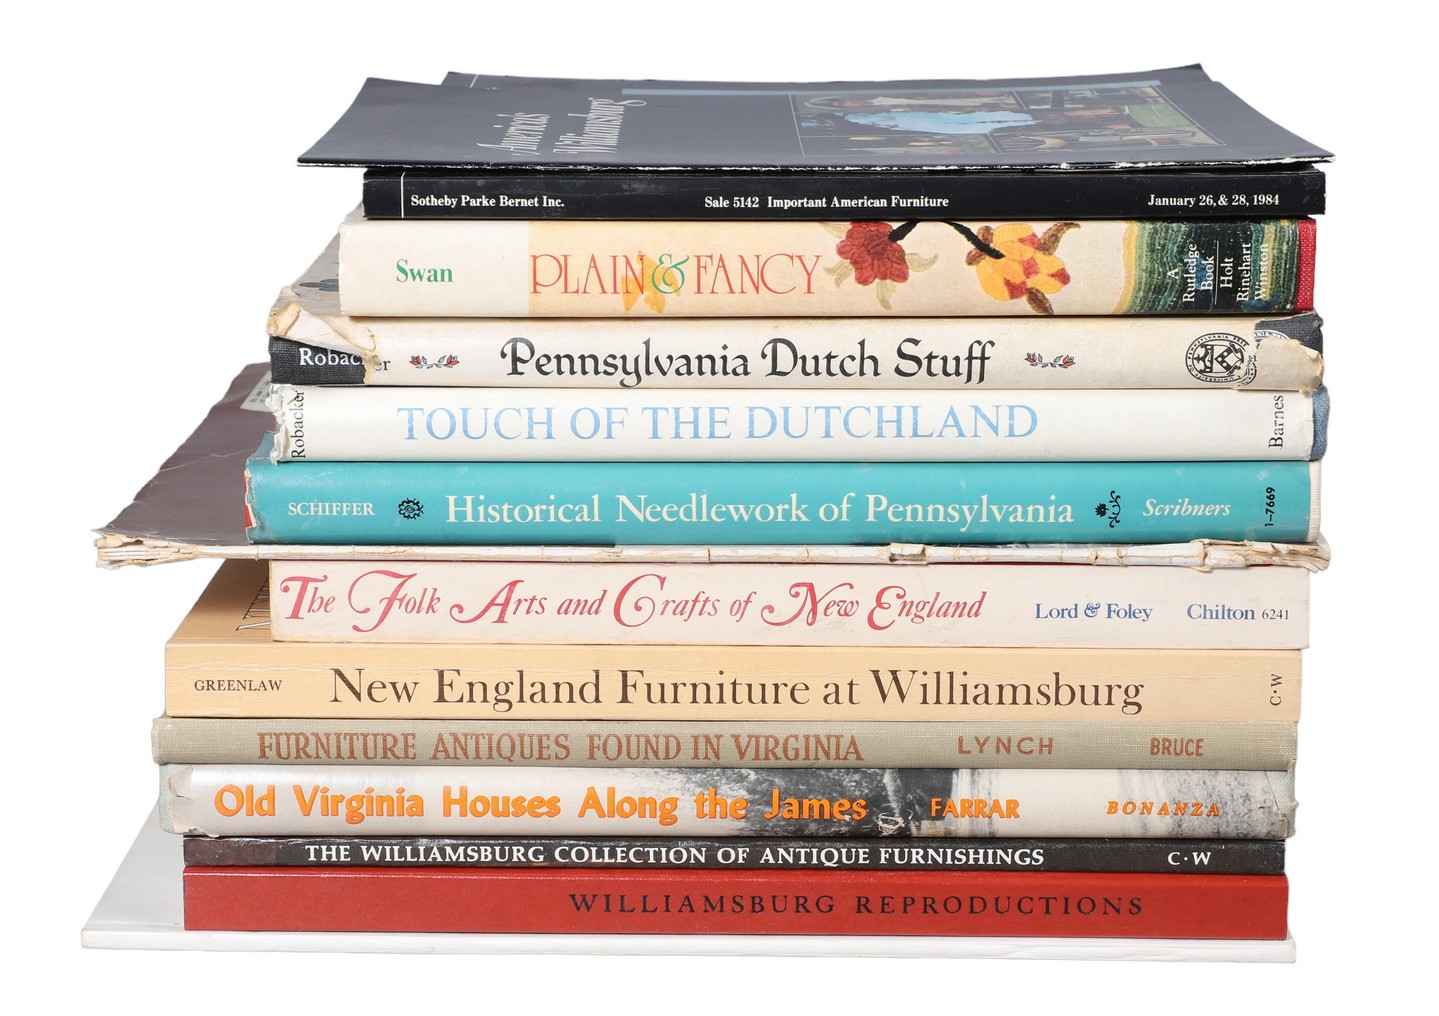 Fourteen books about antiques and